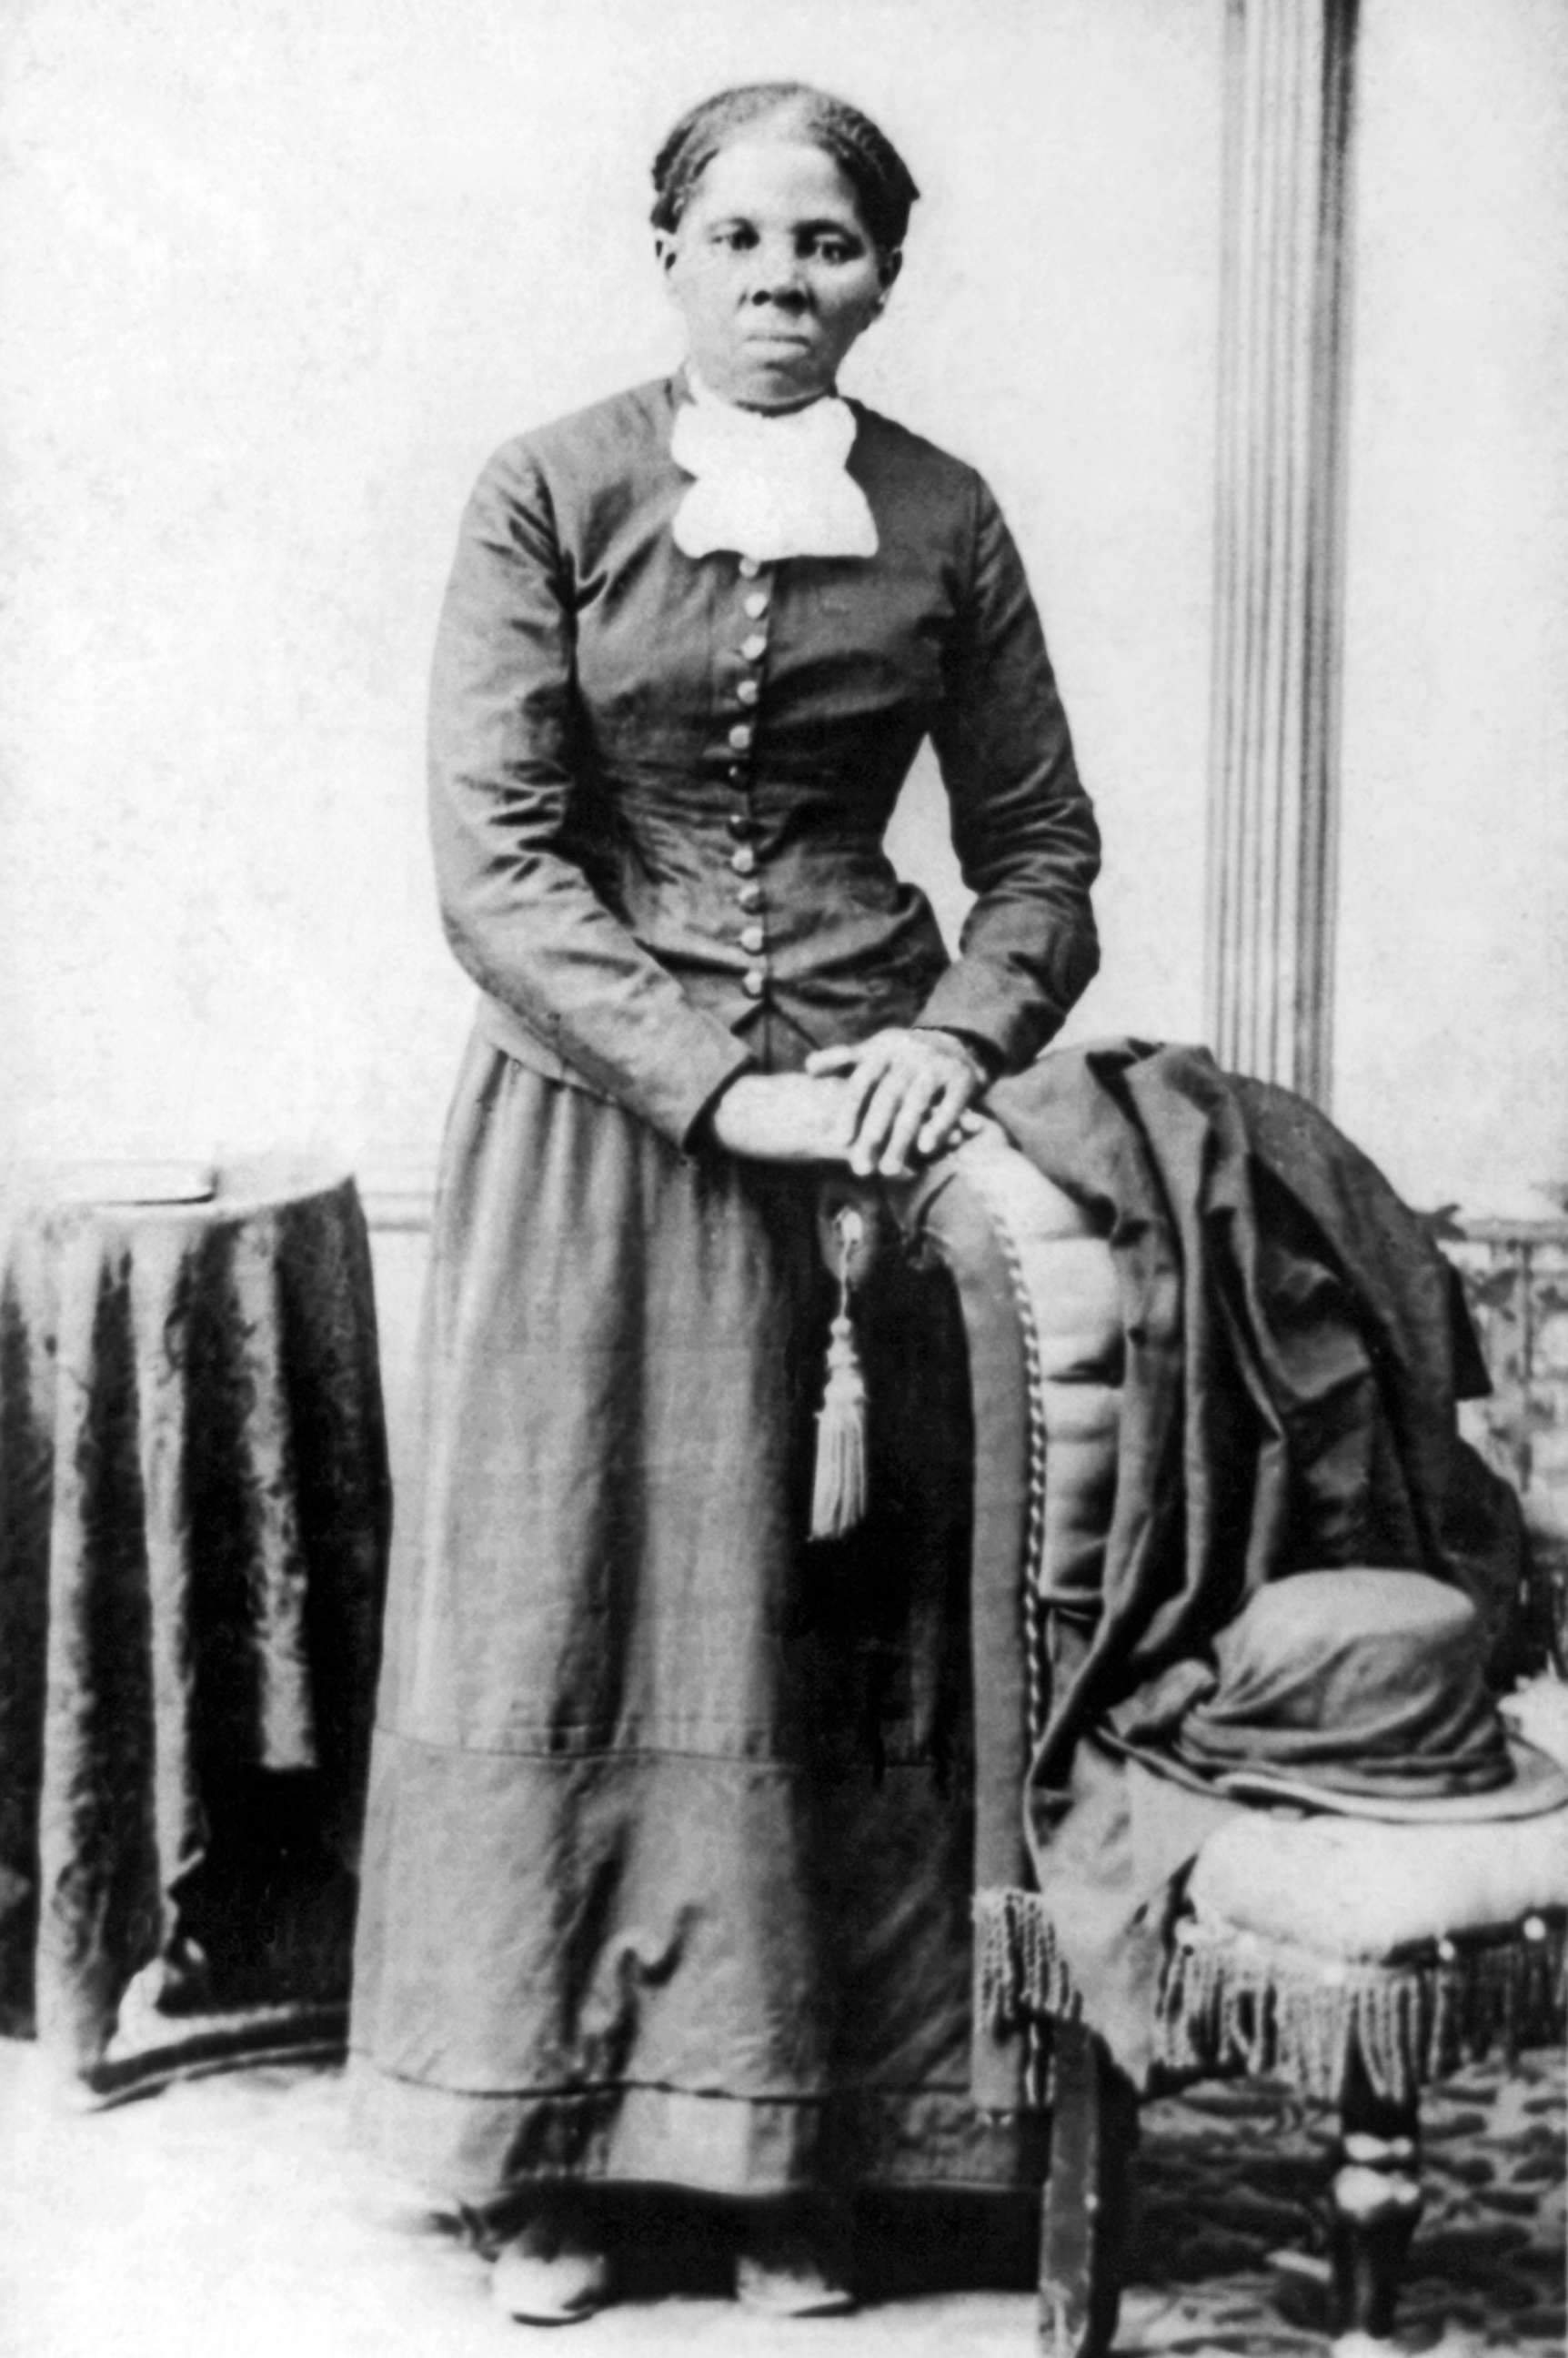 PHOTO: Harriet Tubman, African-American abolitionist and Union spy during the American Civil War, is pictured circa 1870.